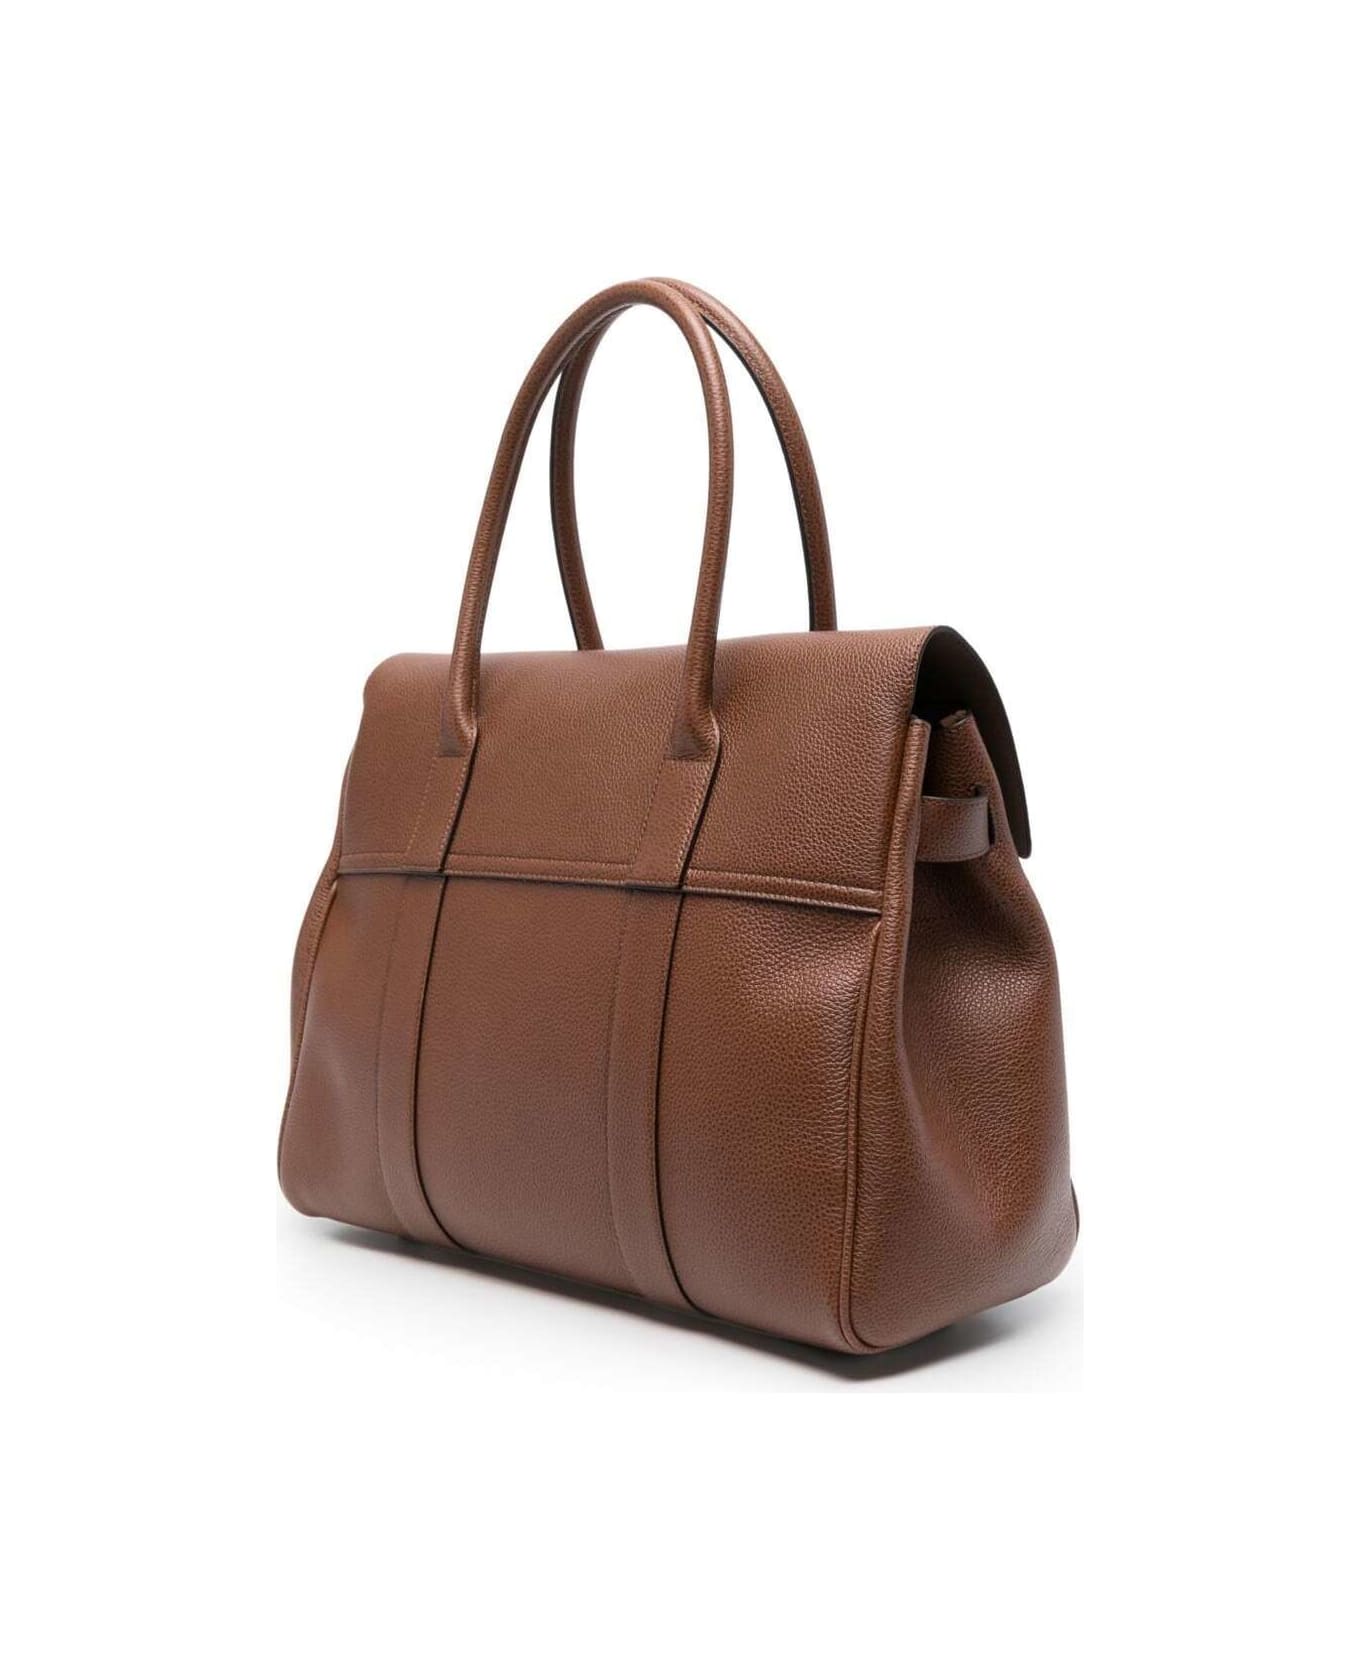 Mulberry Bayswater Brown Leather Handbag Mulberry Woman - Brown